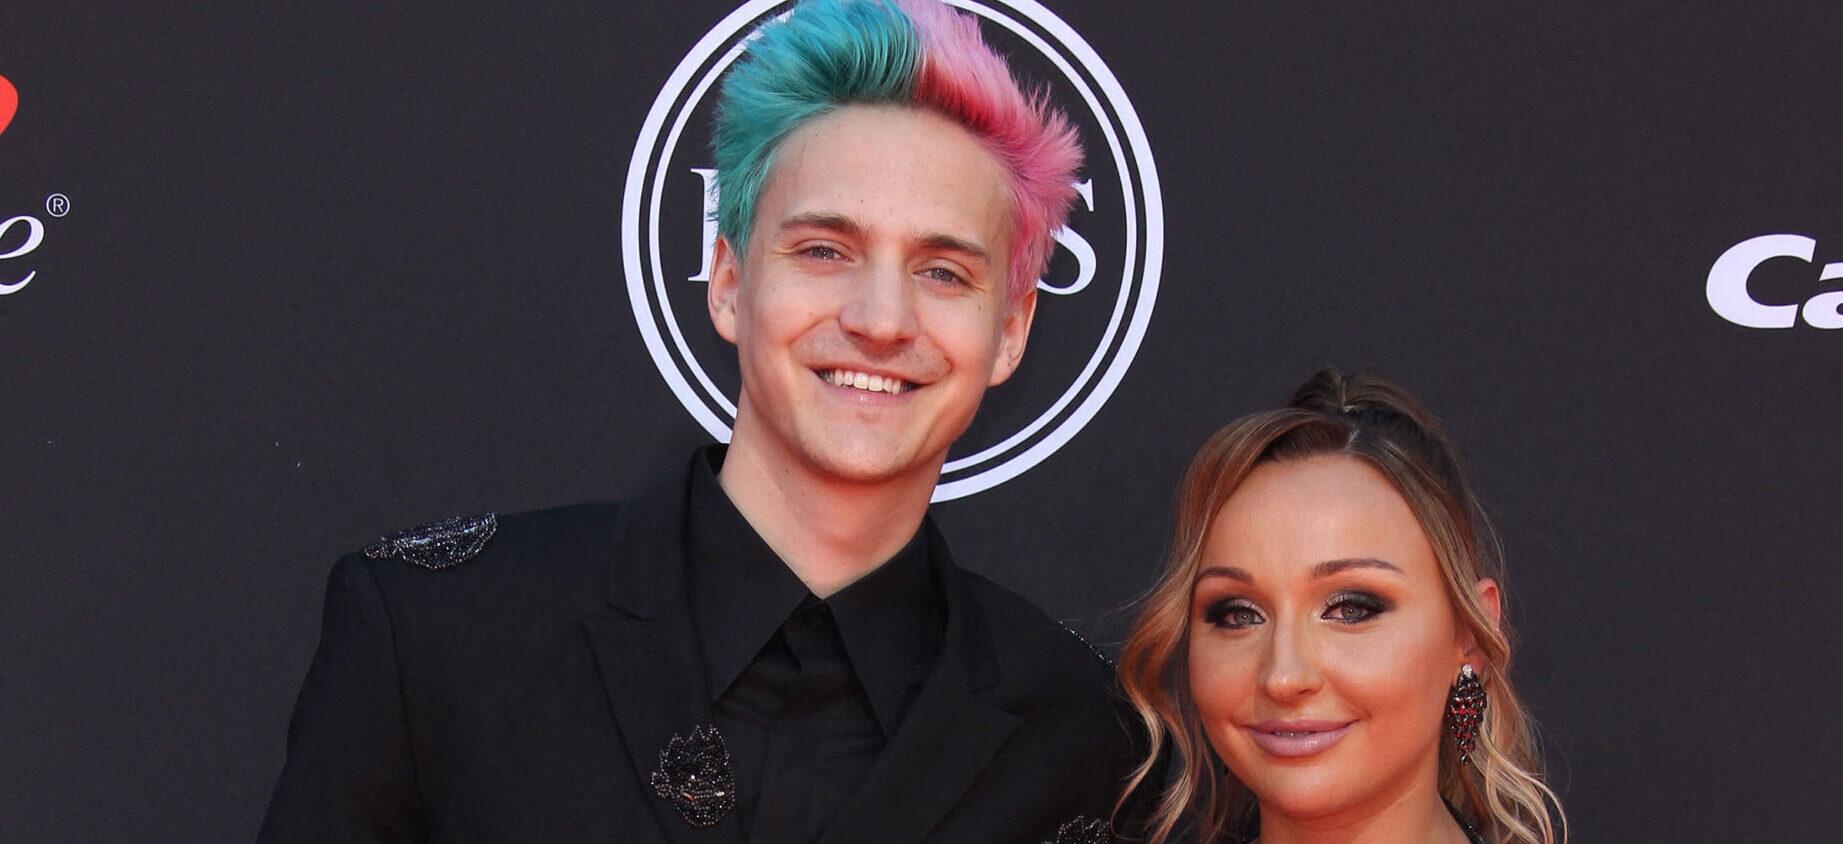 YouTuber Ninja Recieves Support From Gaming Community Amid Cancer Battle